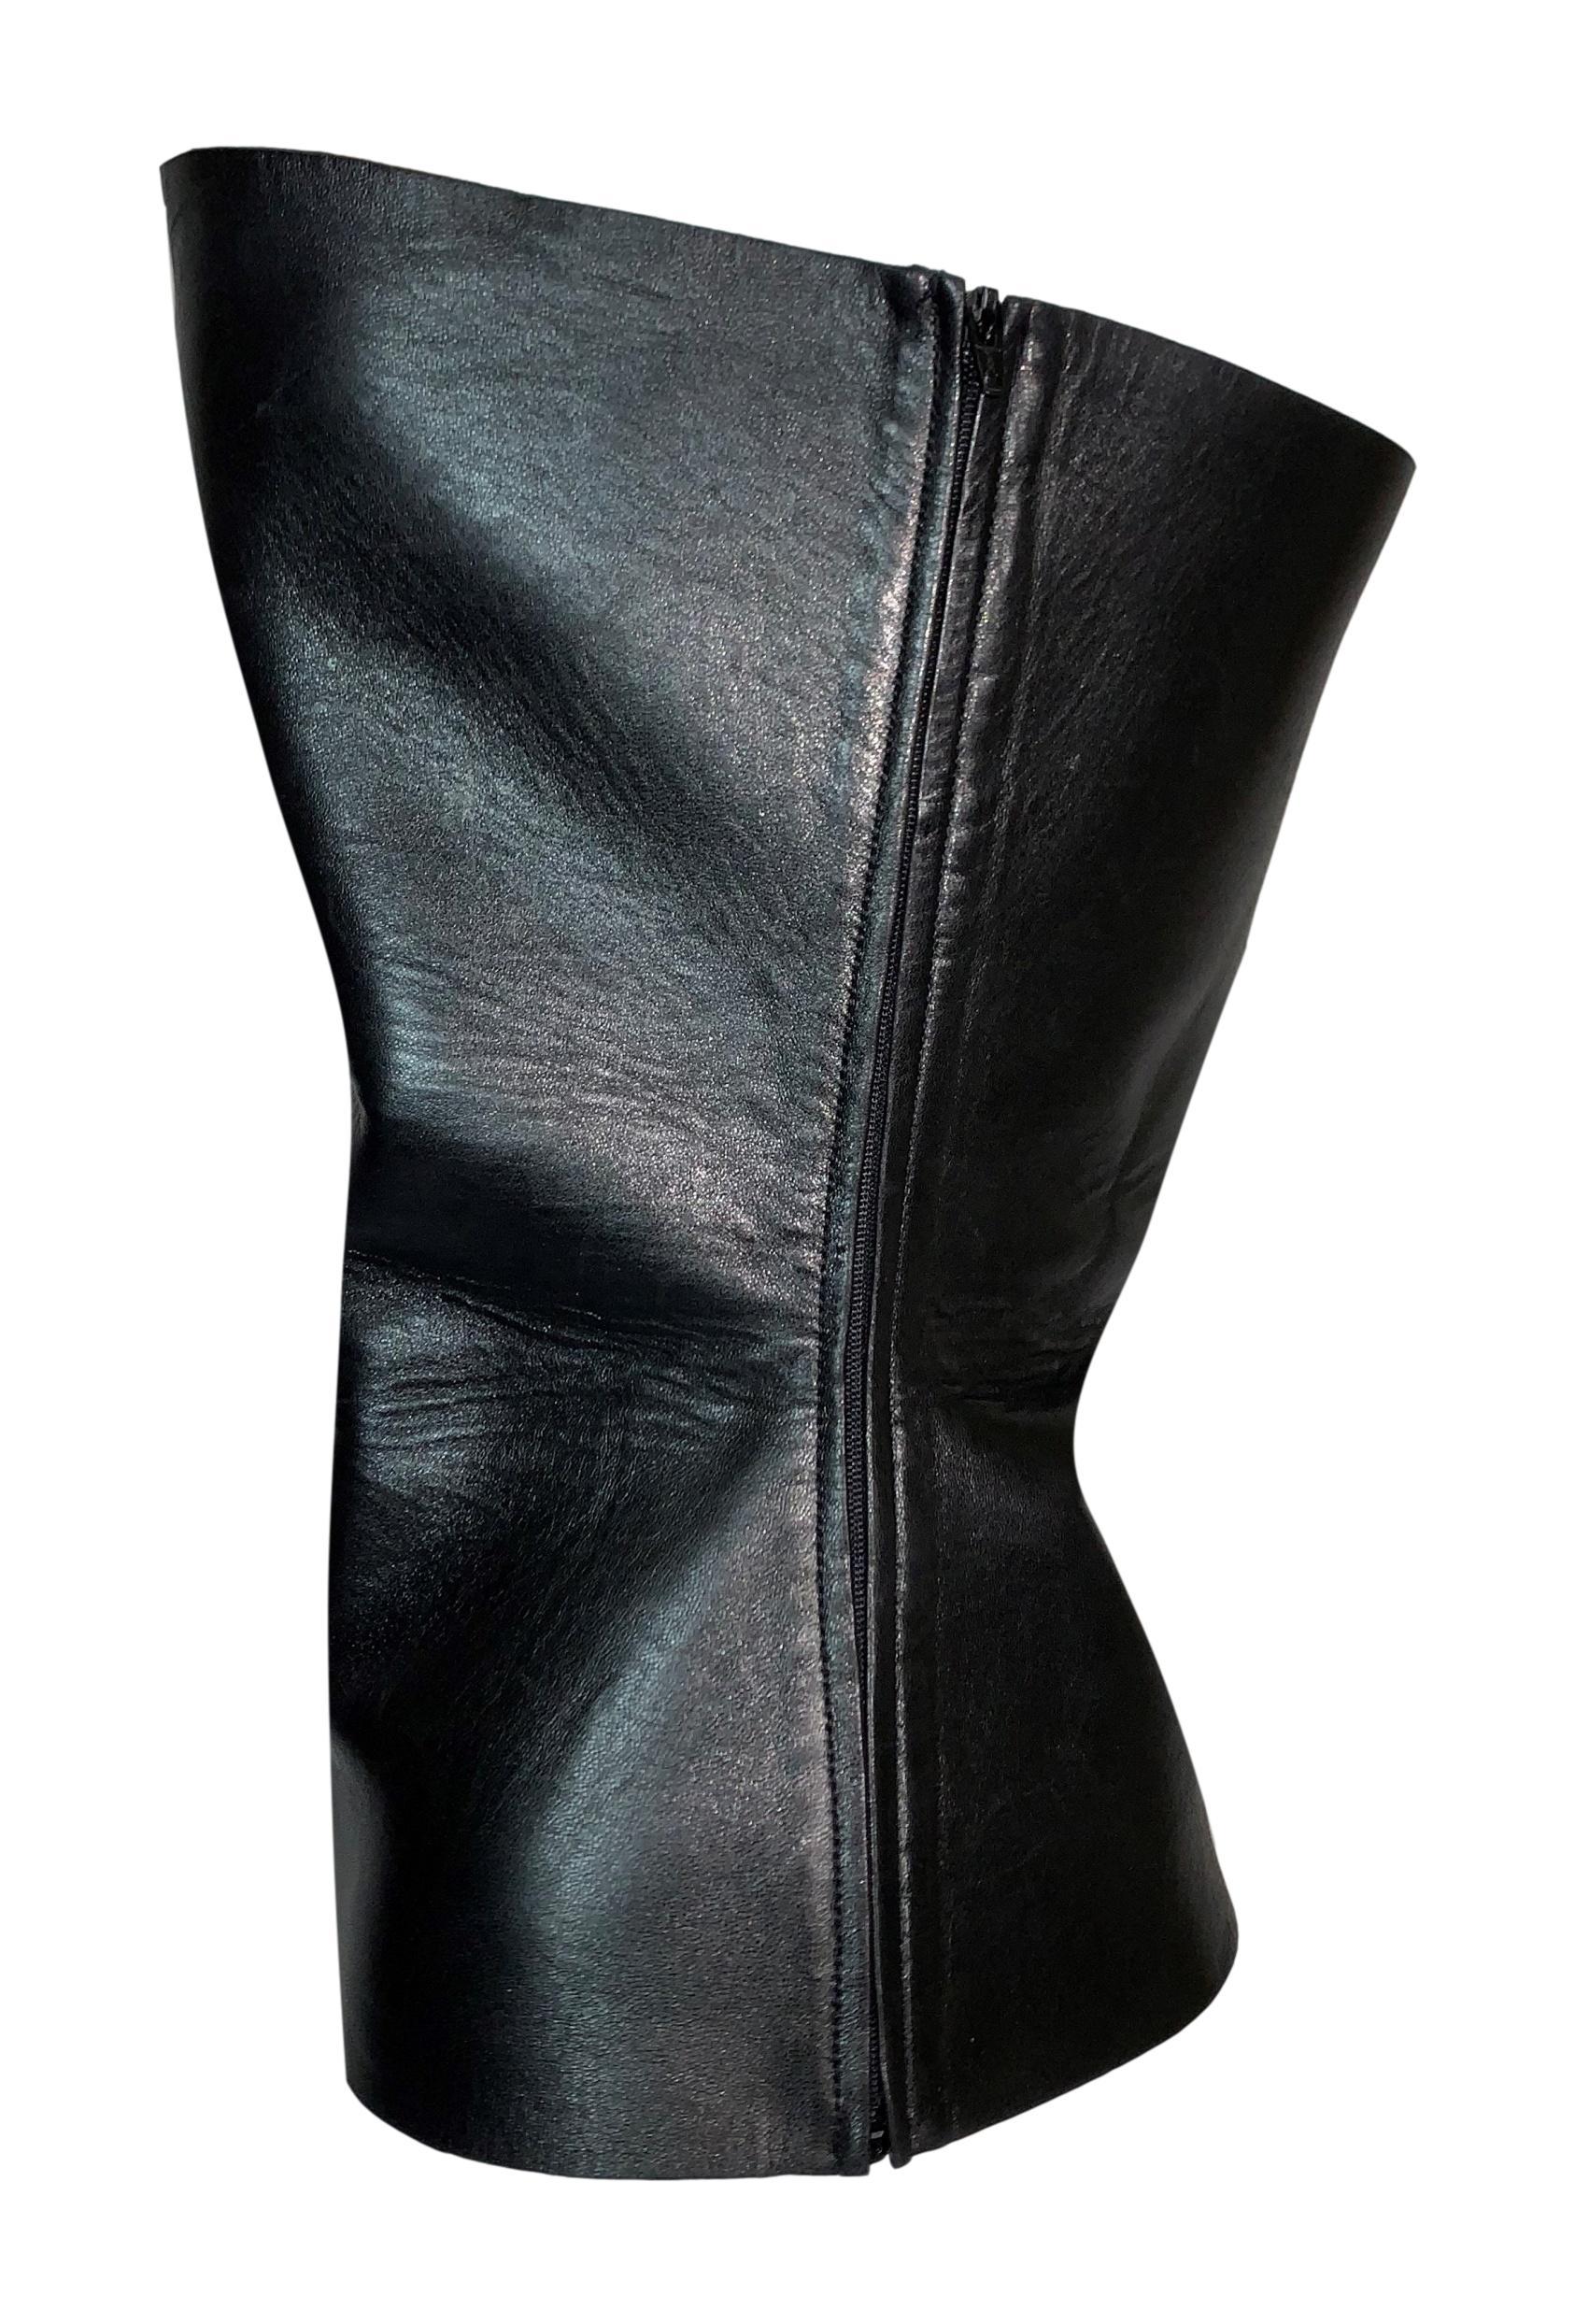 DESIGNER: S/S 2001 Yves Saint Laurent by Tom Ford

Please contact us for more images or information

CONDITION: Good- light wear to leather that is just the usual wear

FABRIC: Leather

COUNTRY: Italy

SIZE: 40

MEASUREMENTS; provided as a courtesy